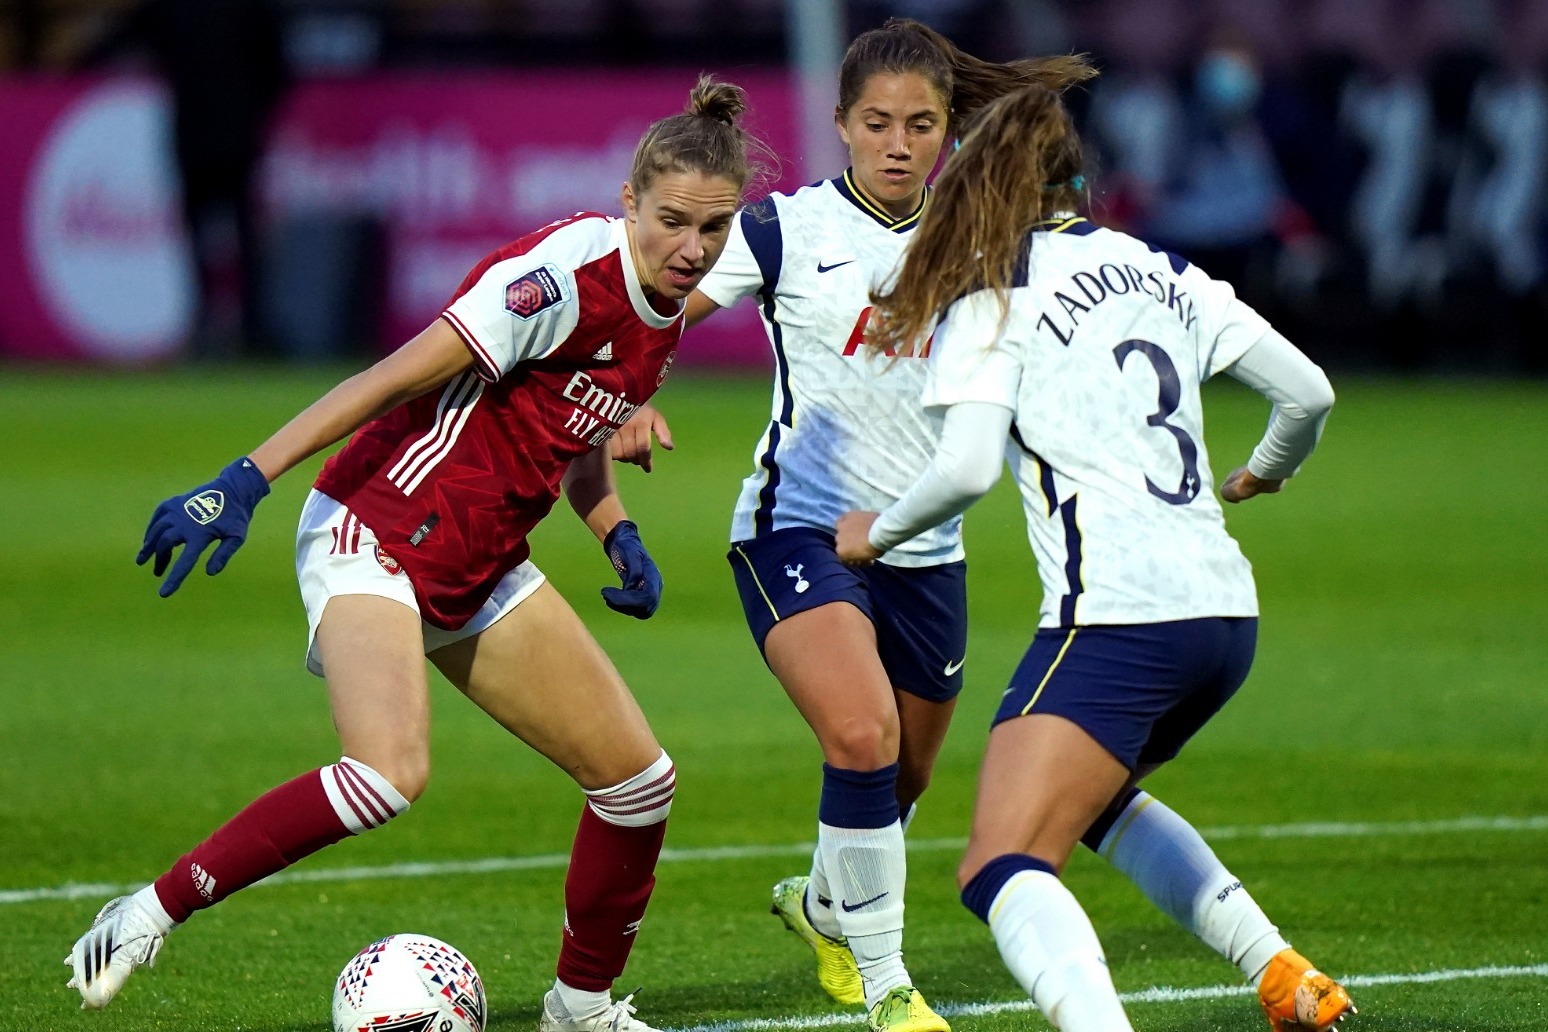 Government to review women’s football in bid for greater parity with men’s game 